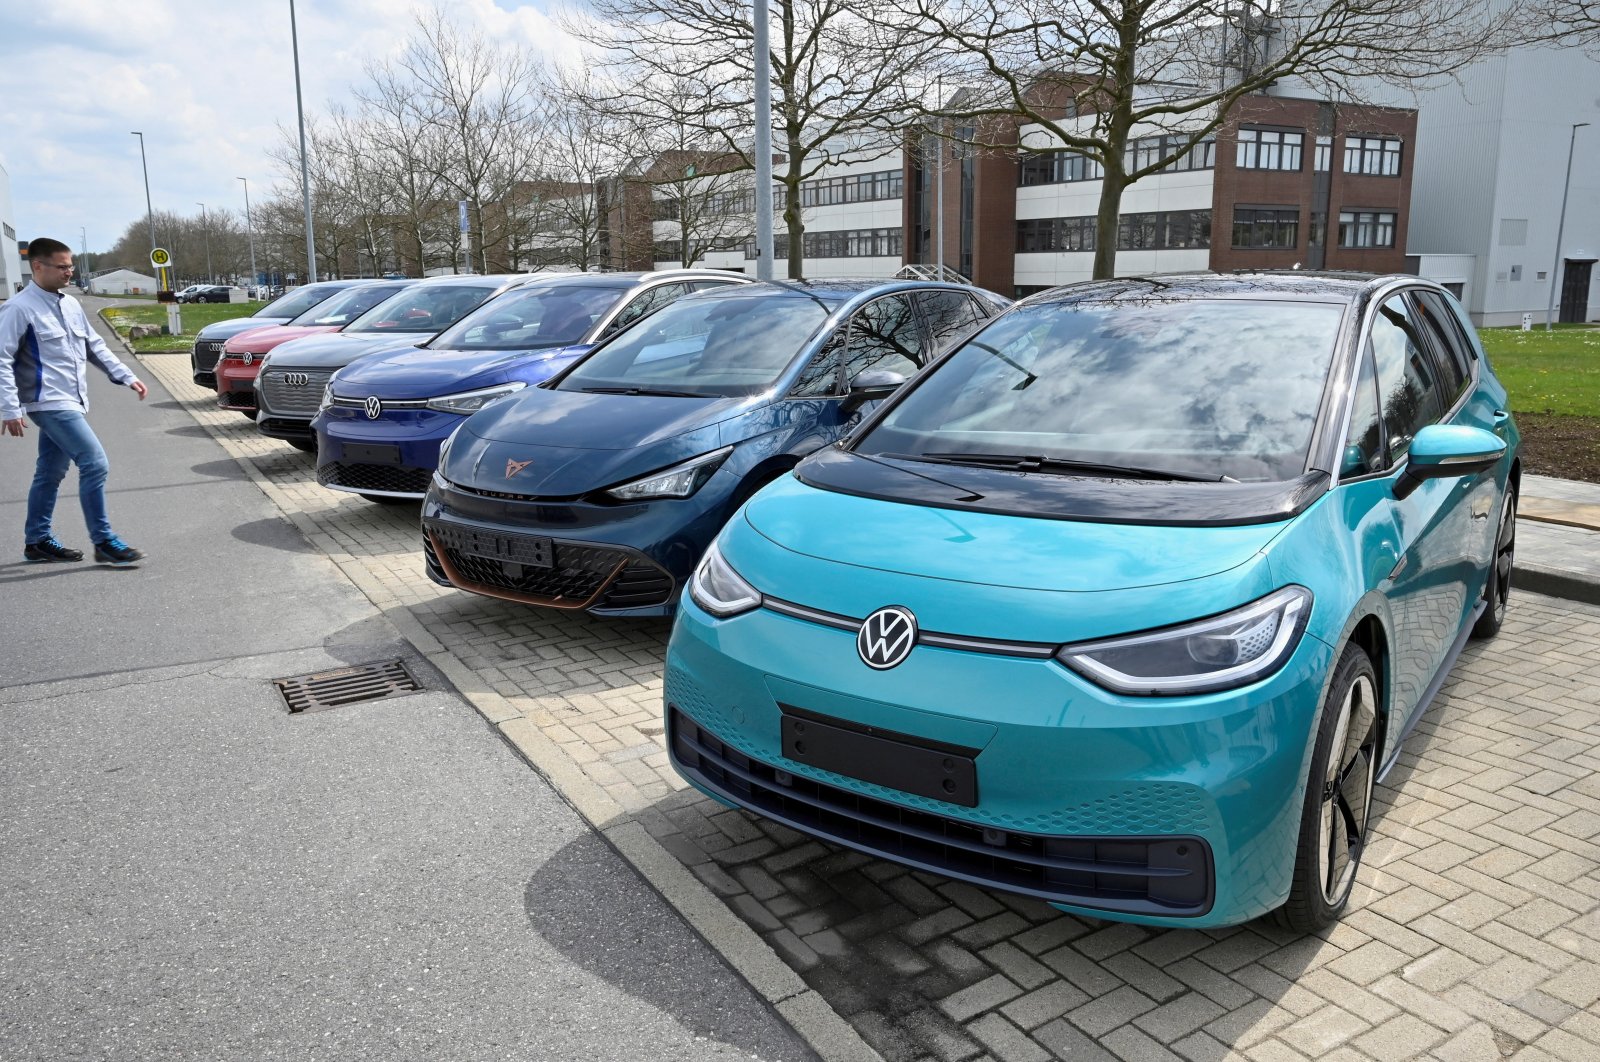 Electric car models of the Volkswagen Group Volkswagen ID.3, Seat Cupra Born, Volkswagen ID.4, Audi Q4 e-tron, Volkswagen ID.5 GTX and Audi Q4 Sportback e-tron are parked outside the production plant of Volkswagen, in Zwickau, Germany, April 26, 2022. (Audi File Photo)